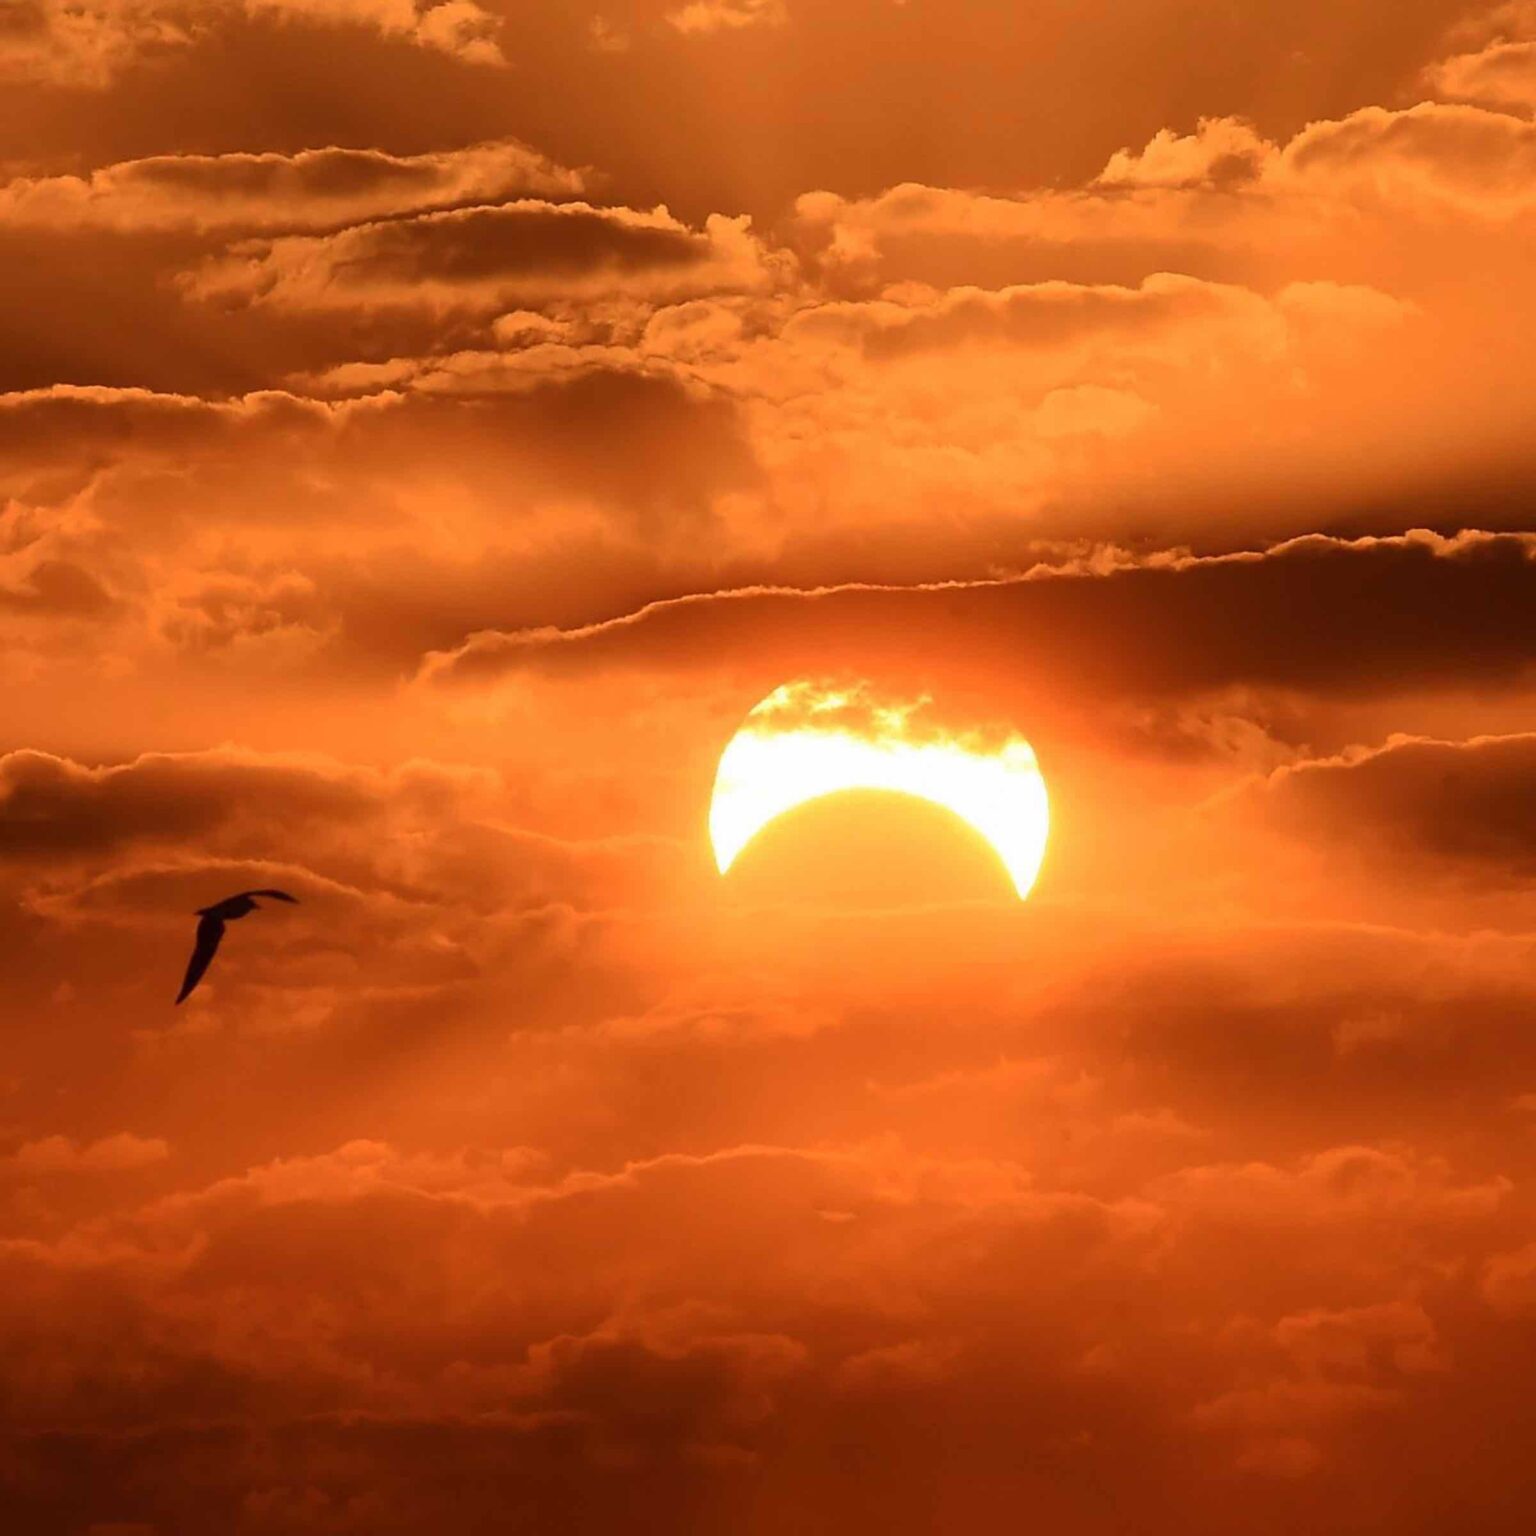 Apparently the Moon liked it, so they put a ring on it! Grab your telescope and dive into these stunning photos of the Ring of Fire solar eclipse. 